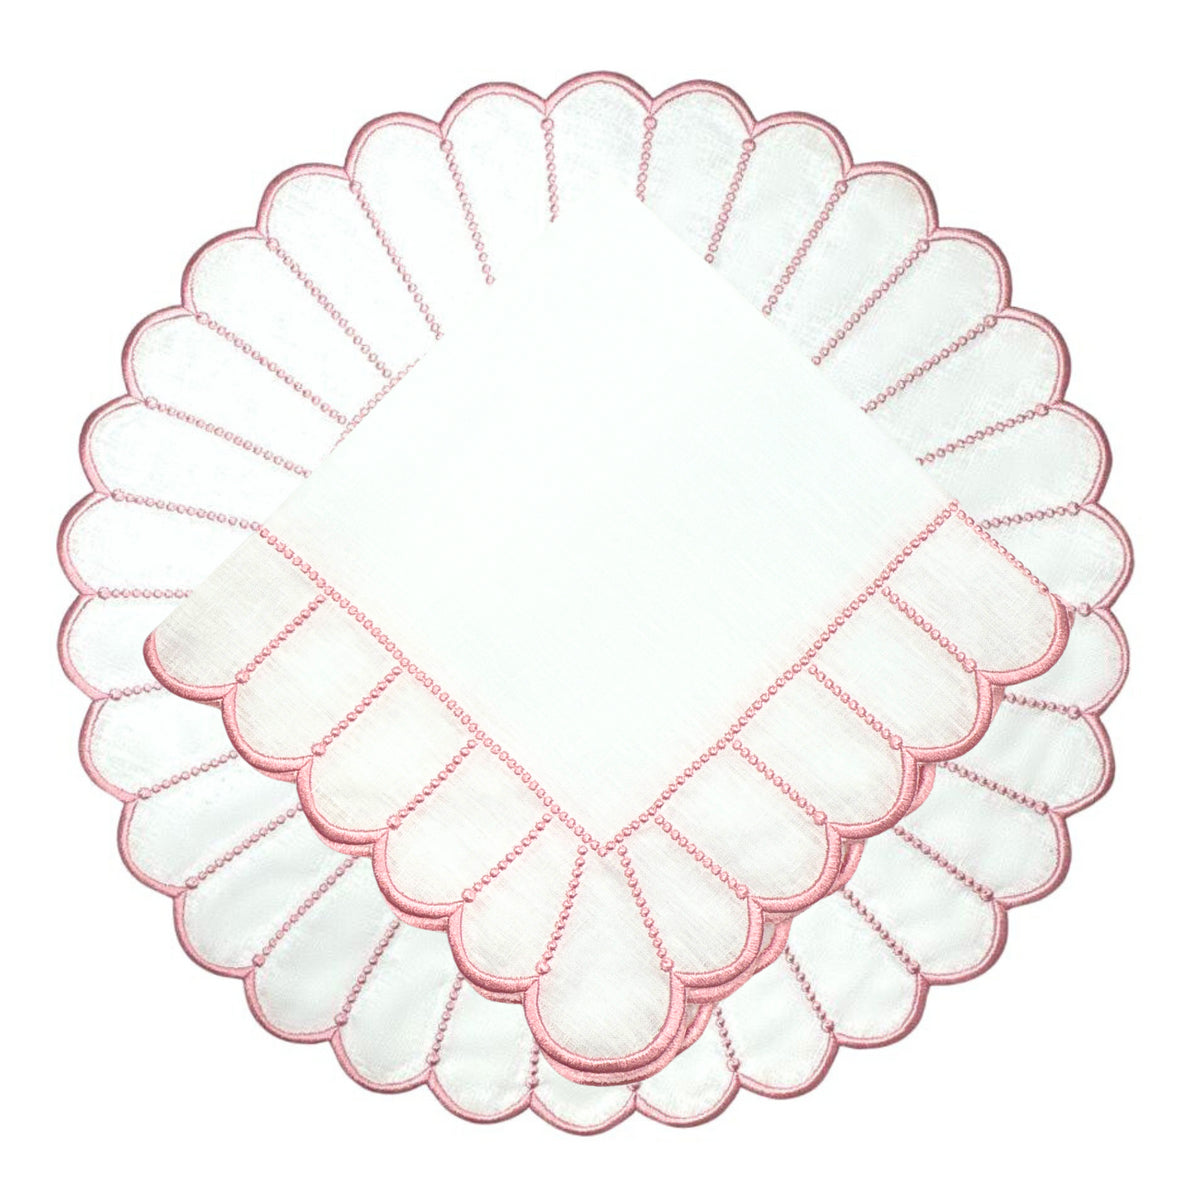 Studio Collection Pippa Placemat in White and Pink, Set of 4